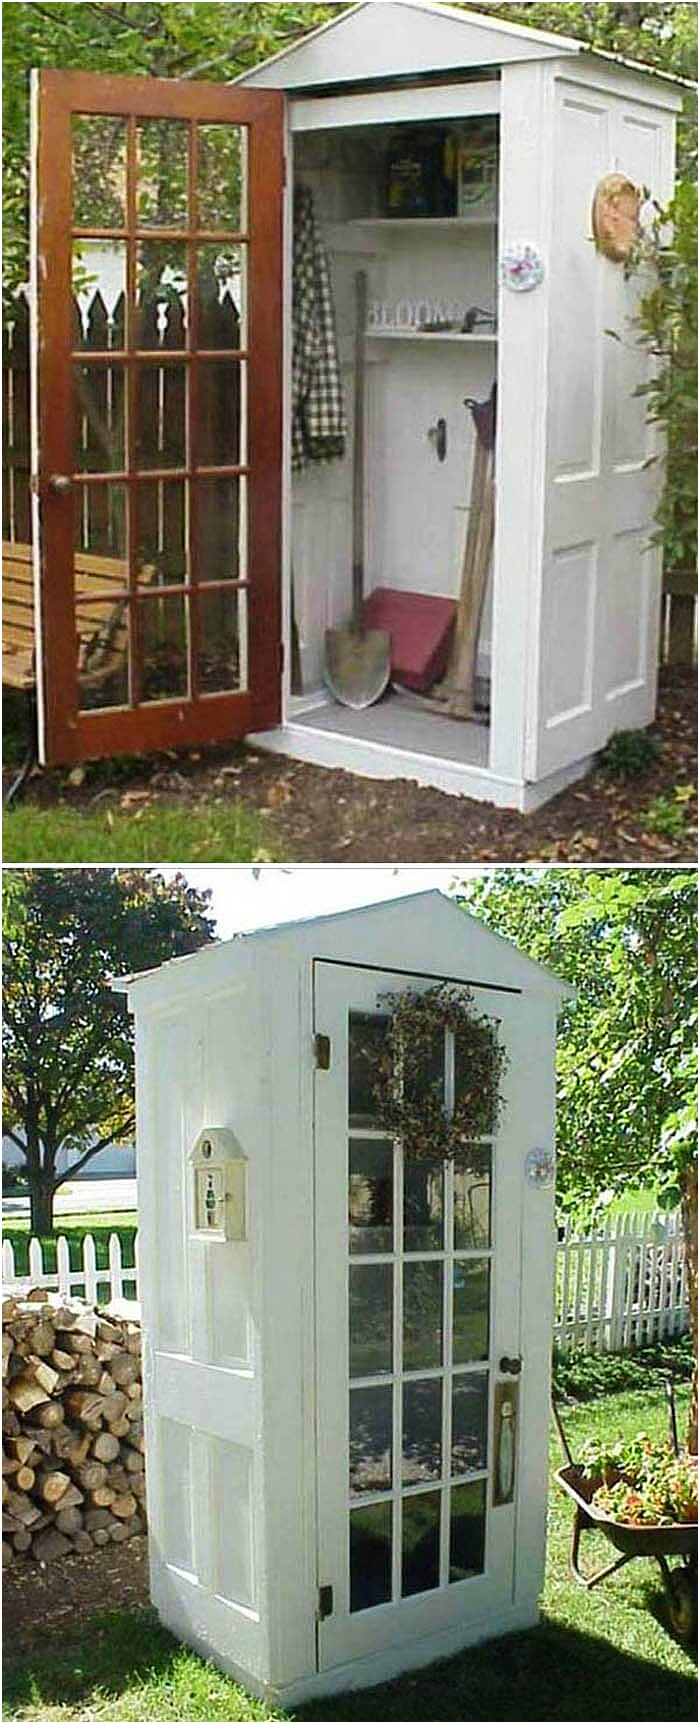 25.SIMPHOME.COM small storage shed projects ideas